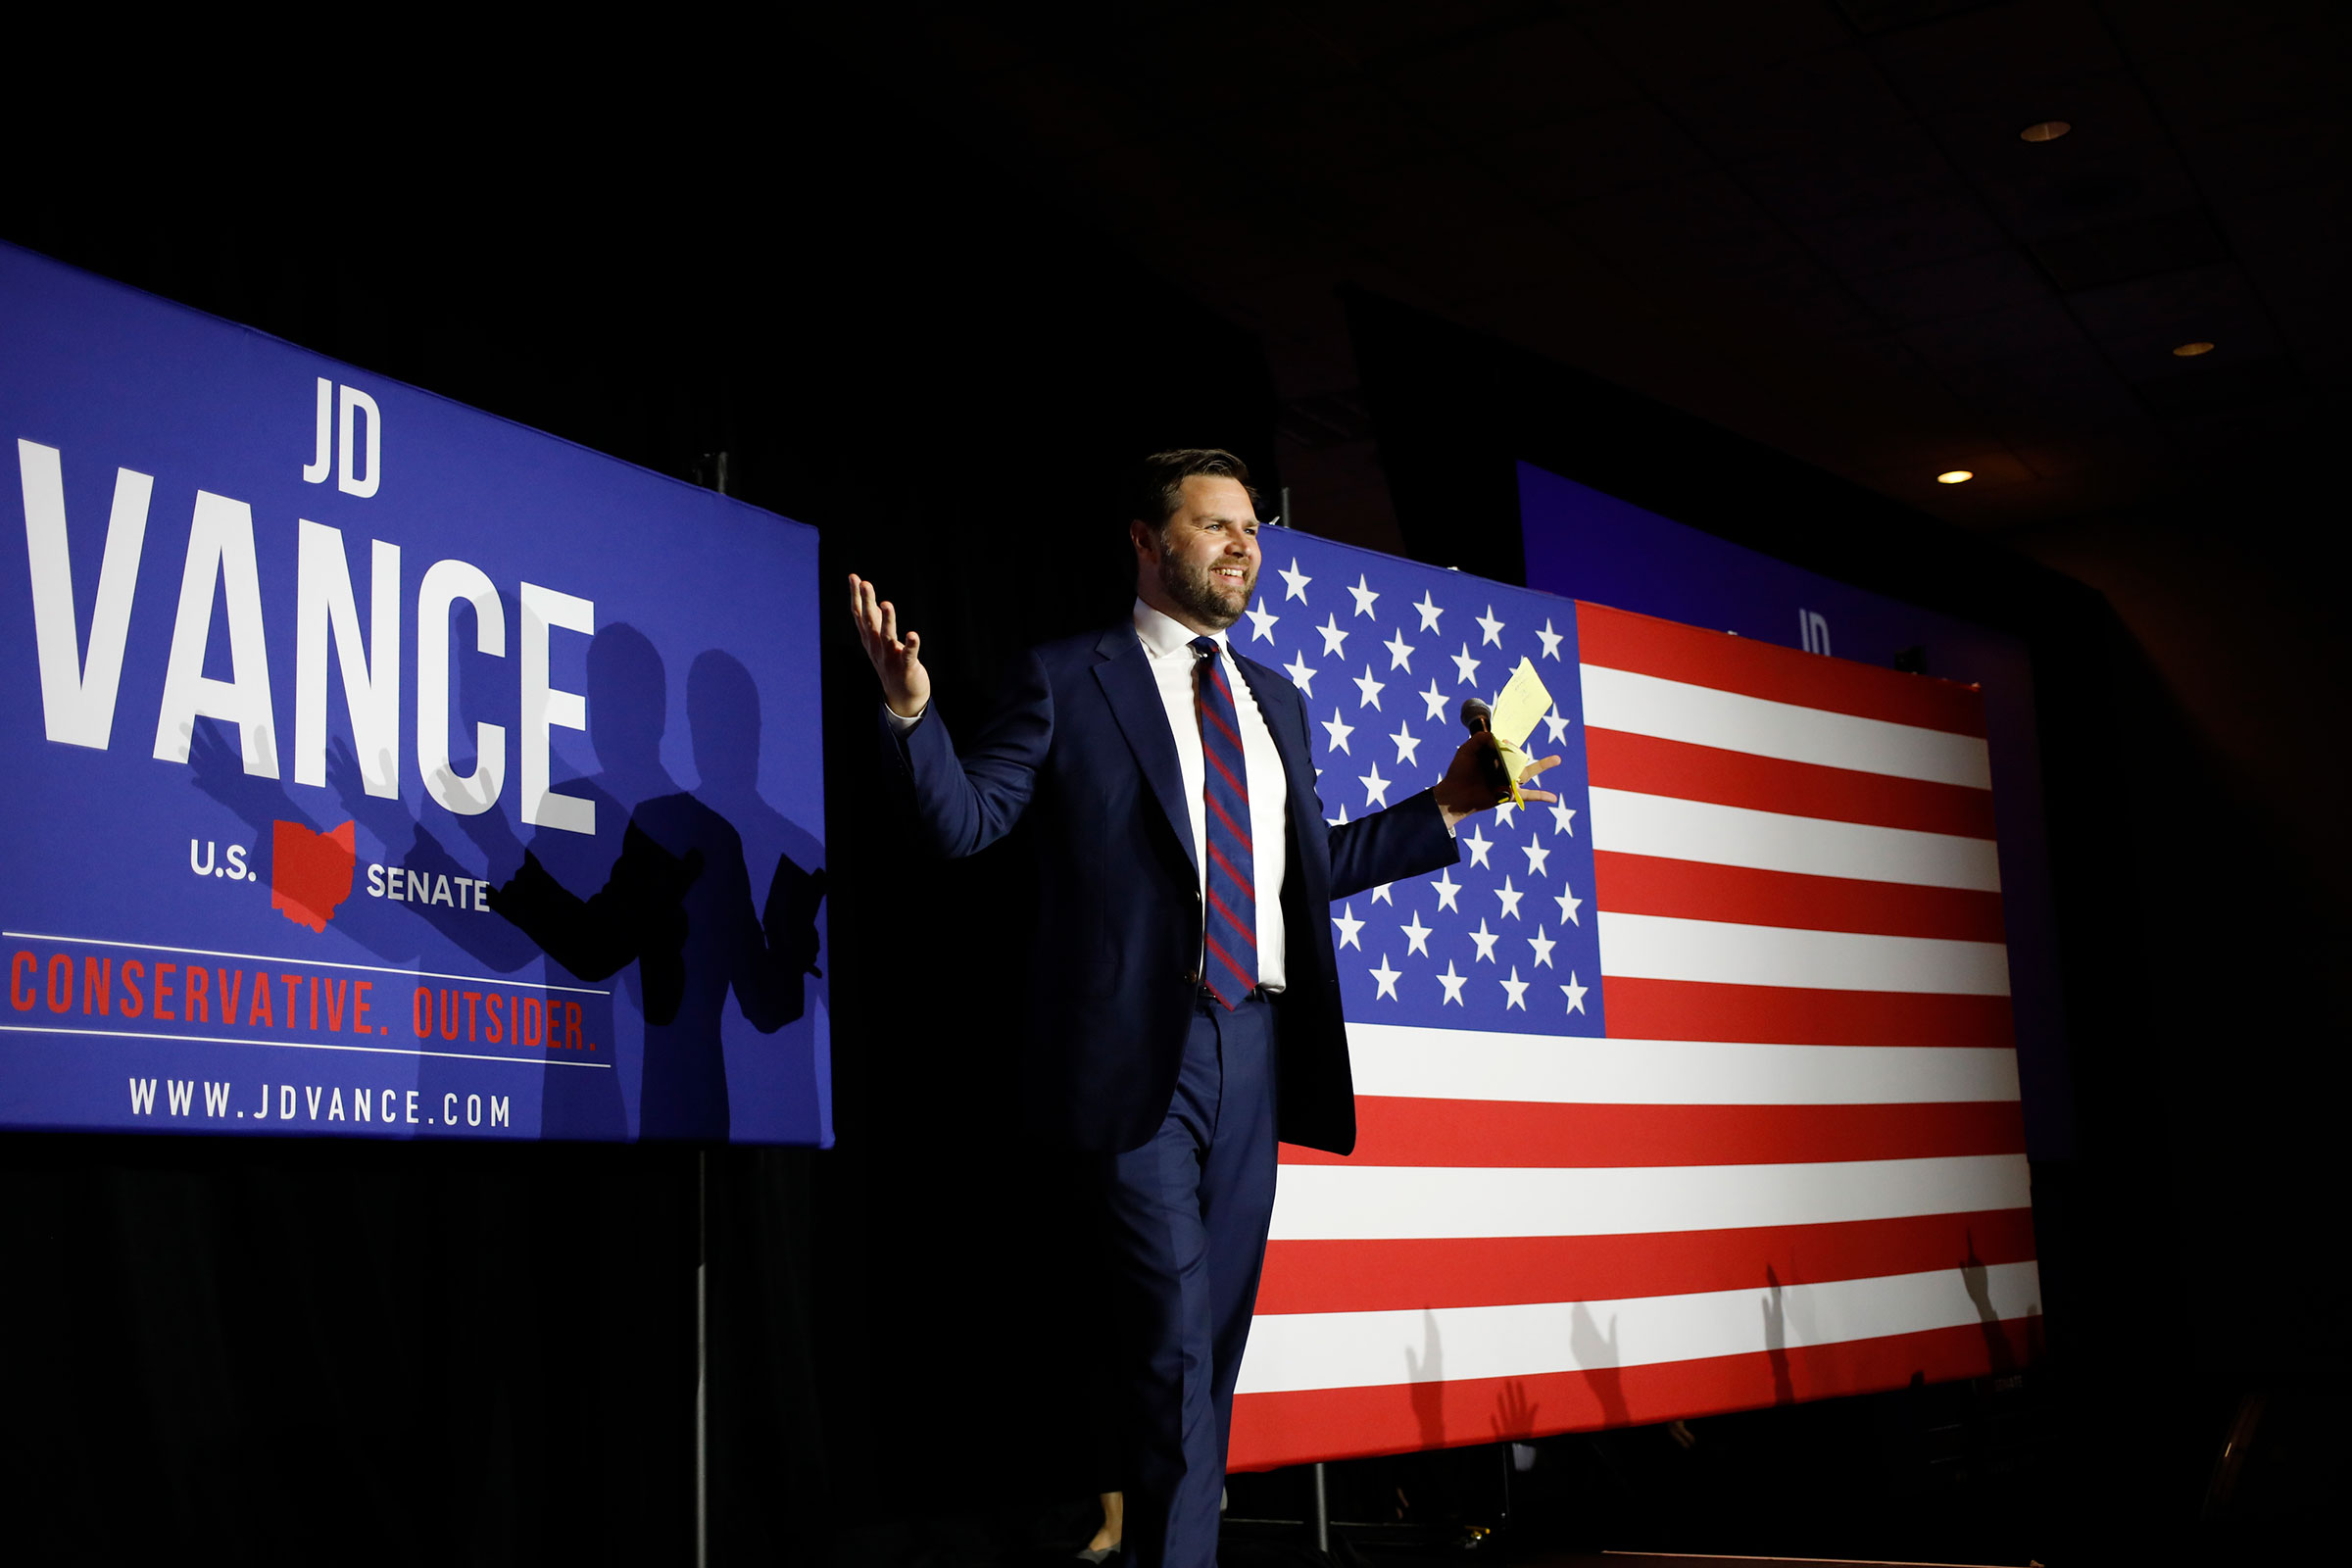 Republican Senate Candidate JD Vance Holds Primary Night Event